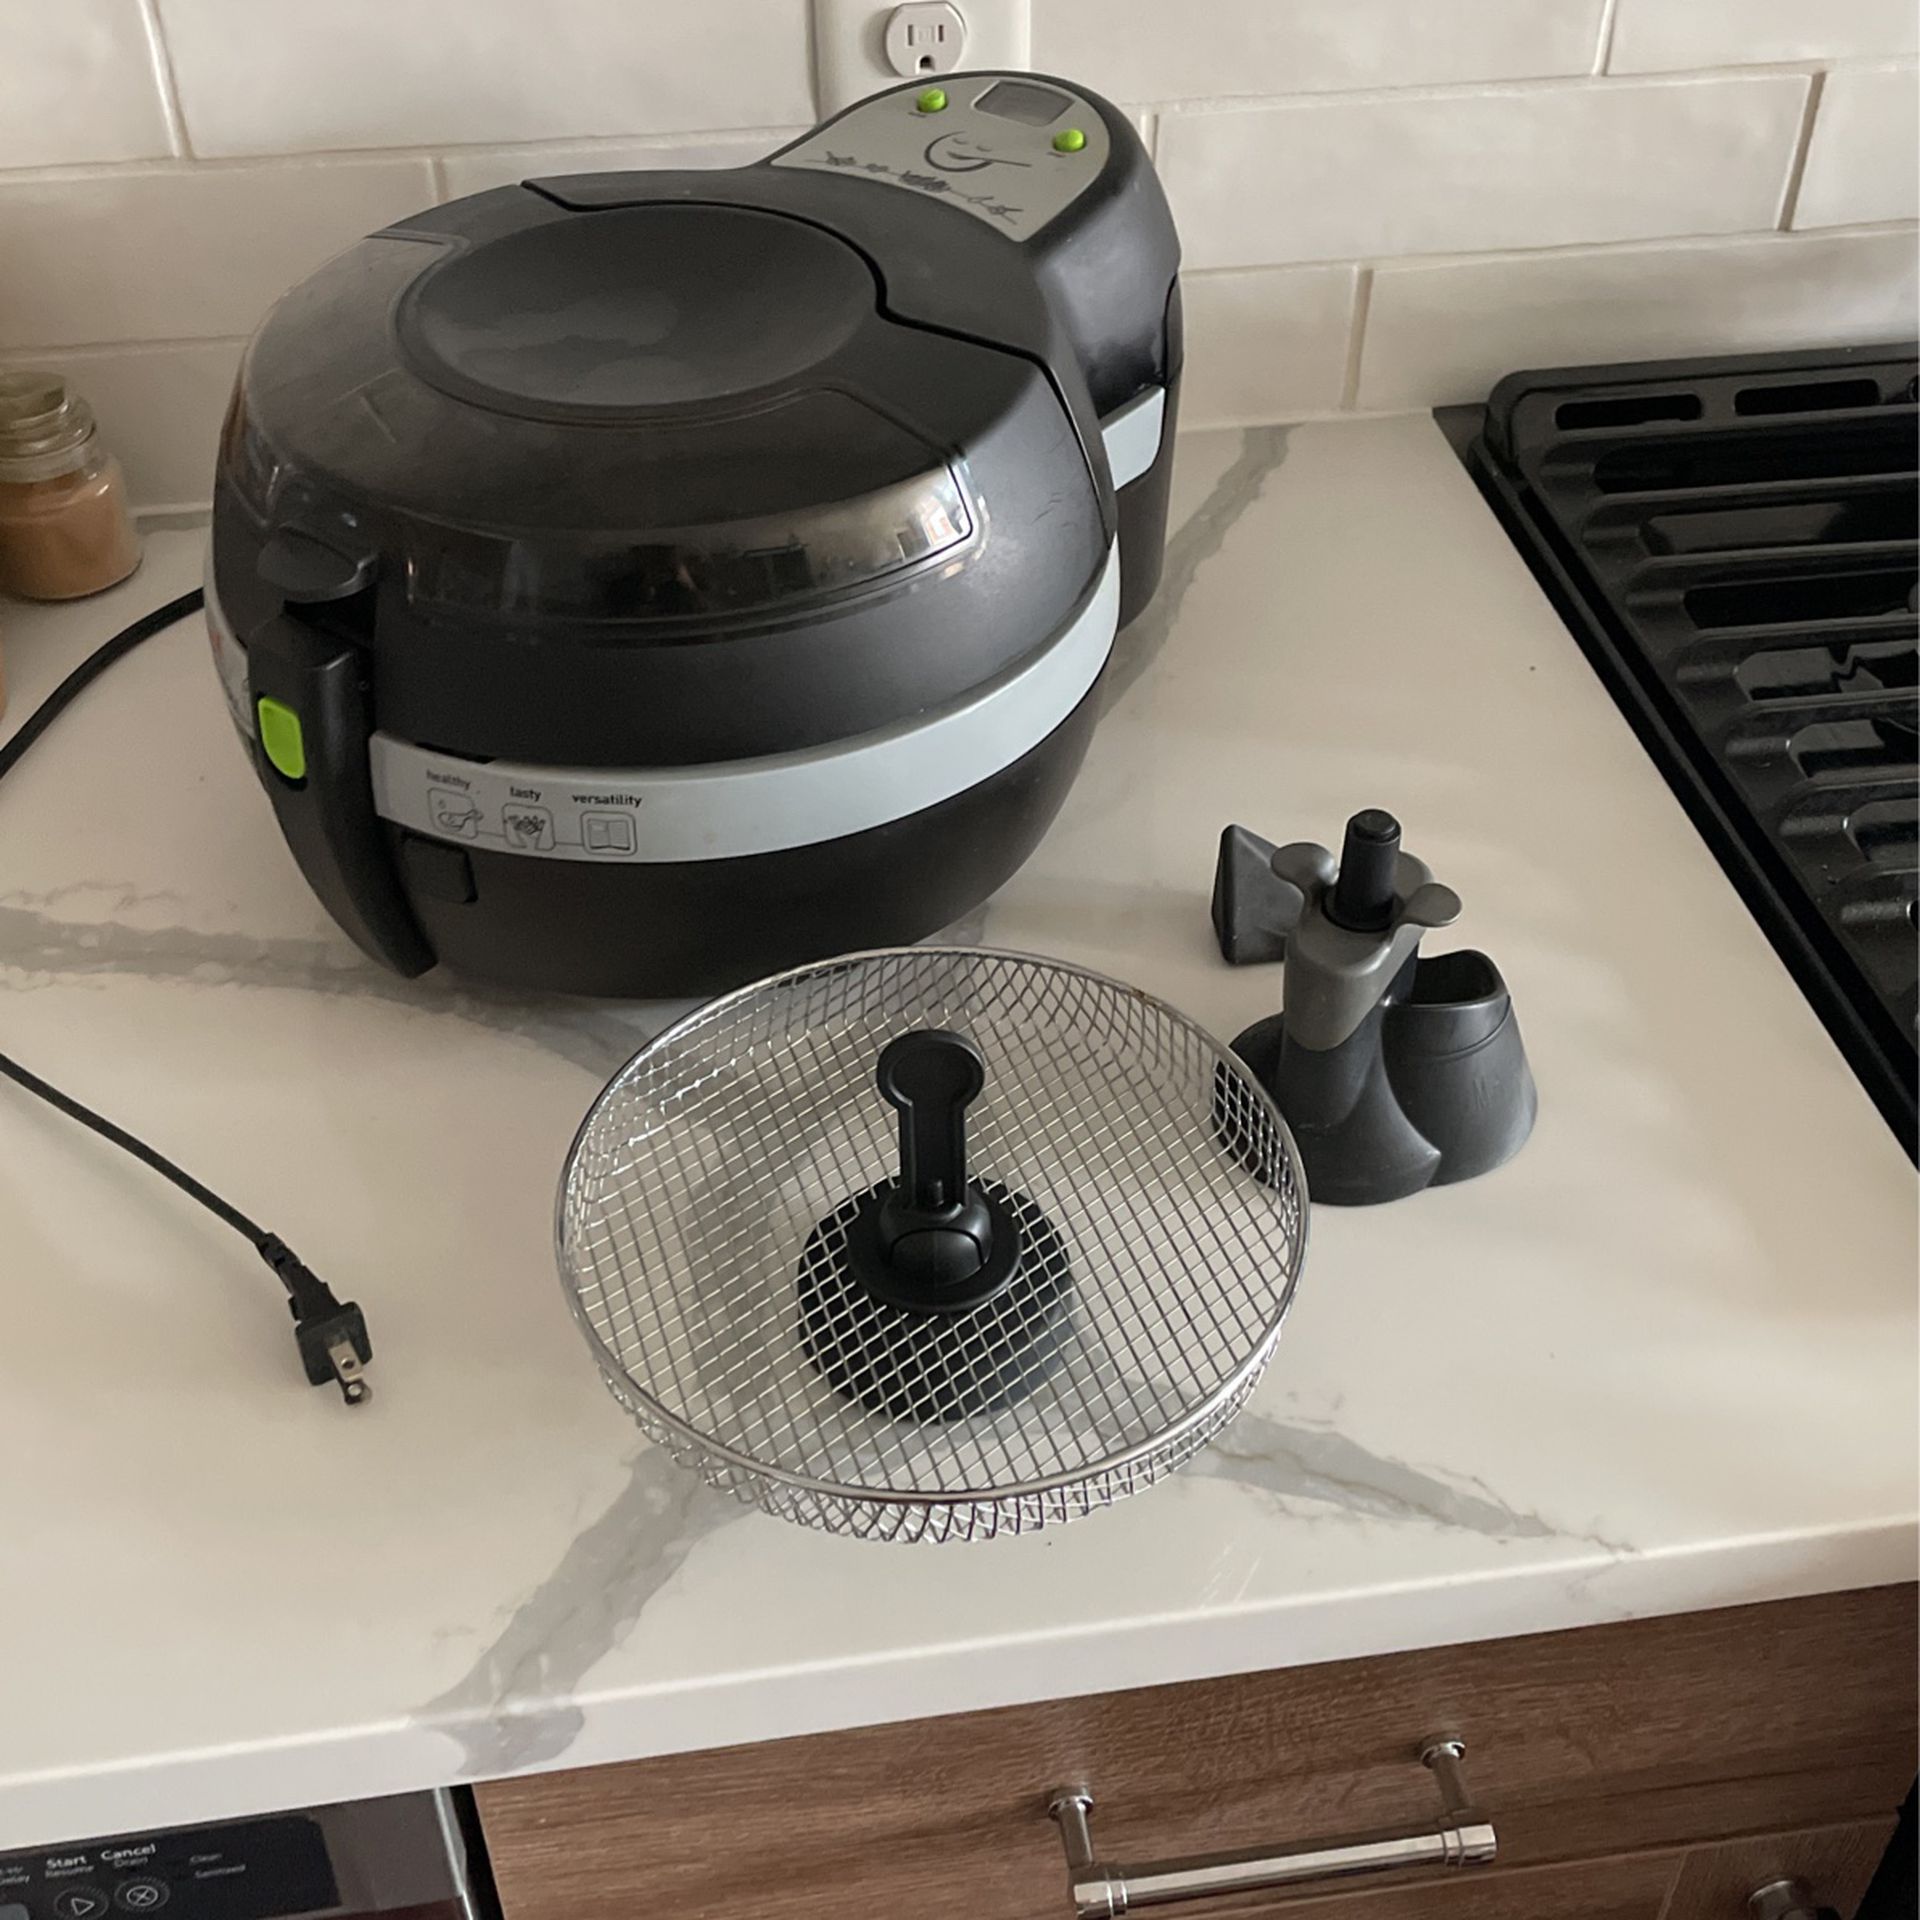 T-fal Activity - Air fryer + additional insert